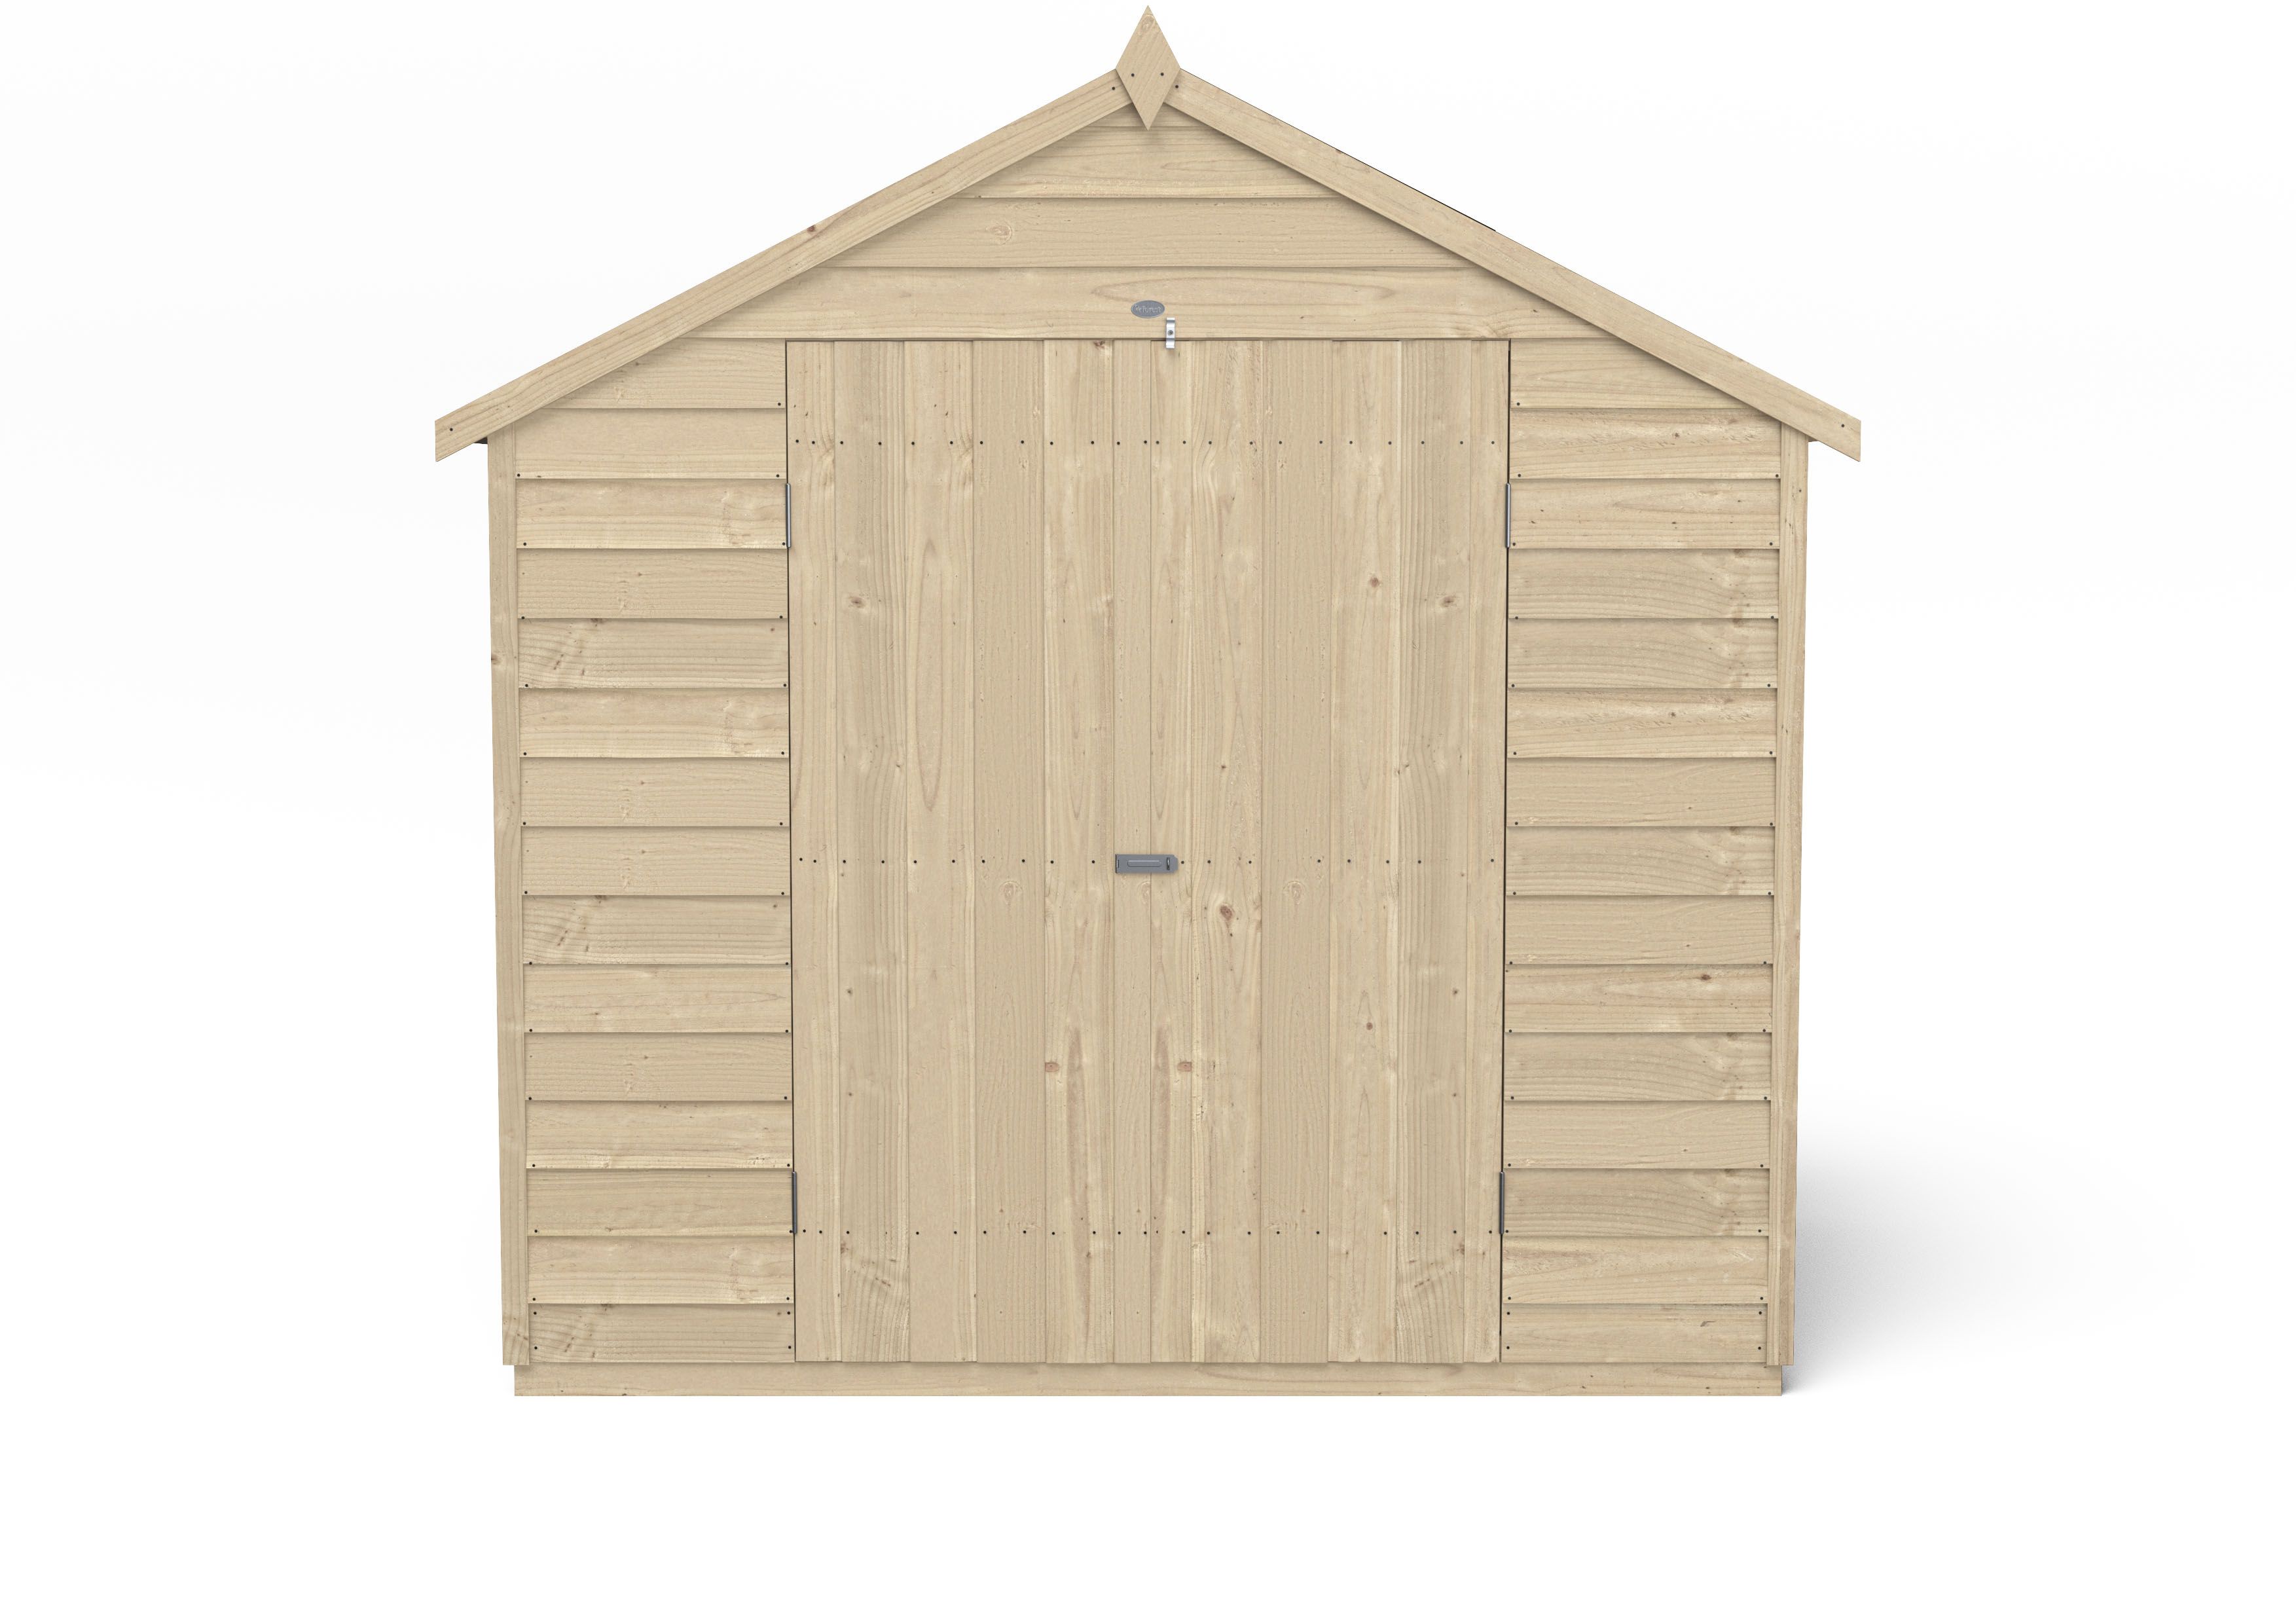 Forest Garden Overlap 7x5 ft Apex Wooden Pressure treated 2 door Shed with floor & 1 window (Base included) - Assembly service included